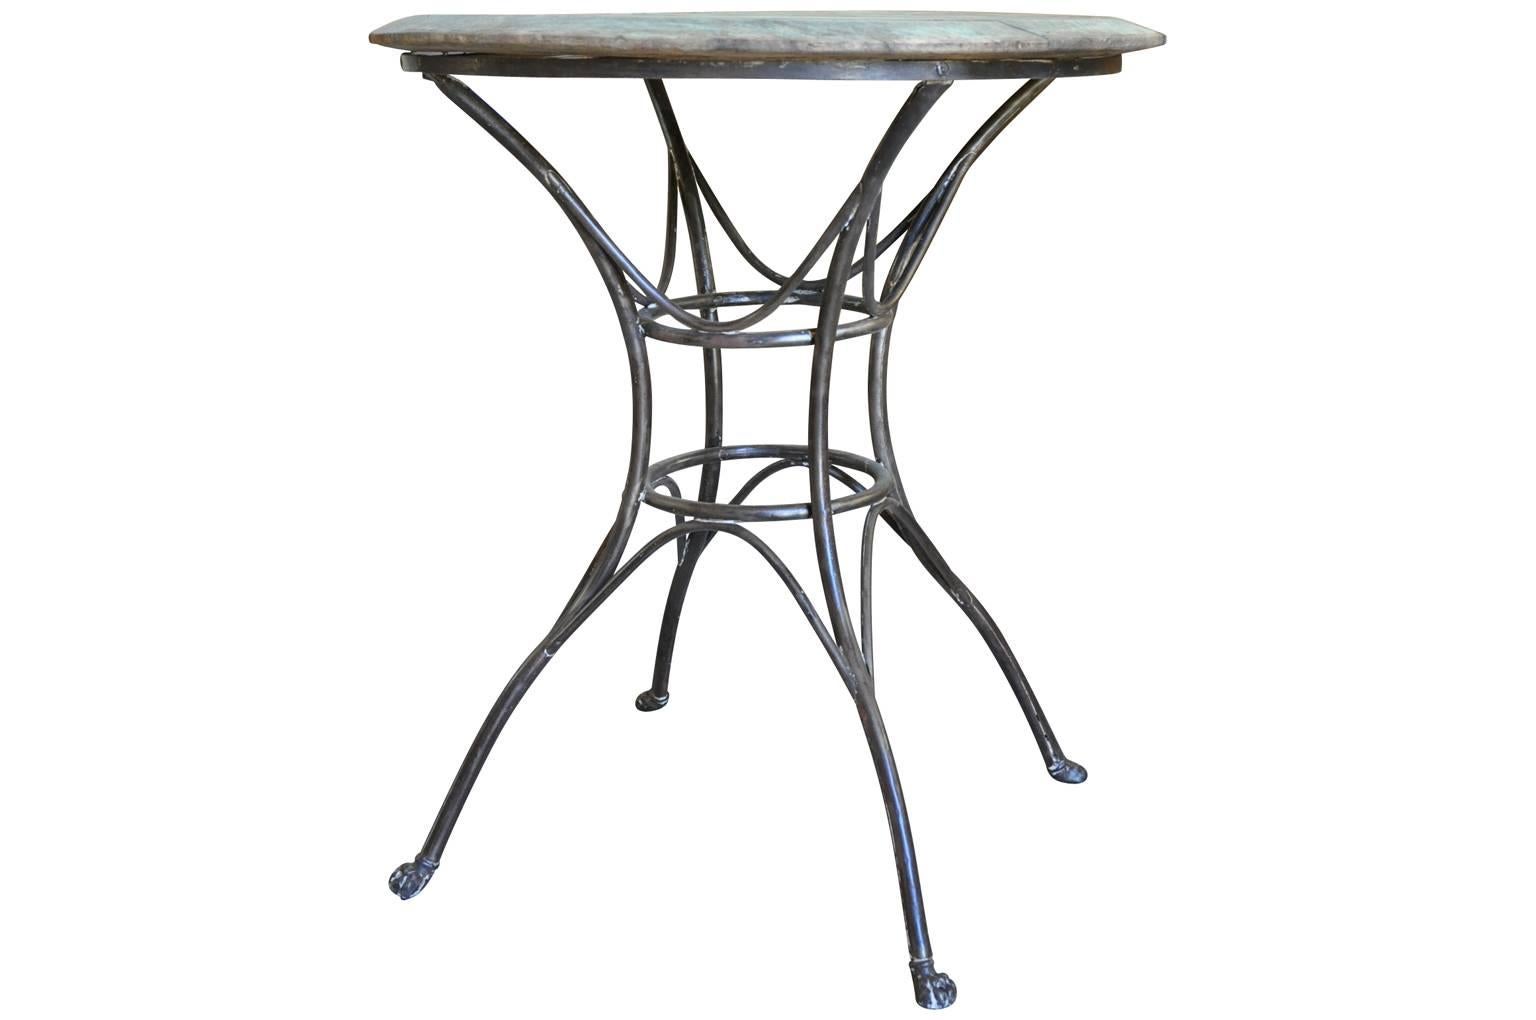 A delightful later 19th century Bistro Table from the Paris region. Beautifully constructed from sculptural iron work and a beautifully patina'd top. An excellent side table for any interior of garden.